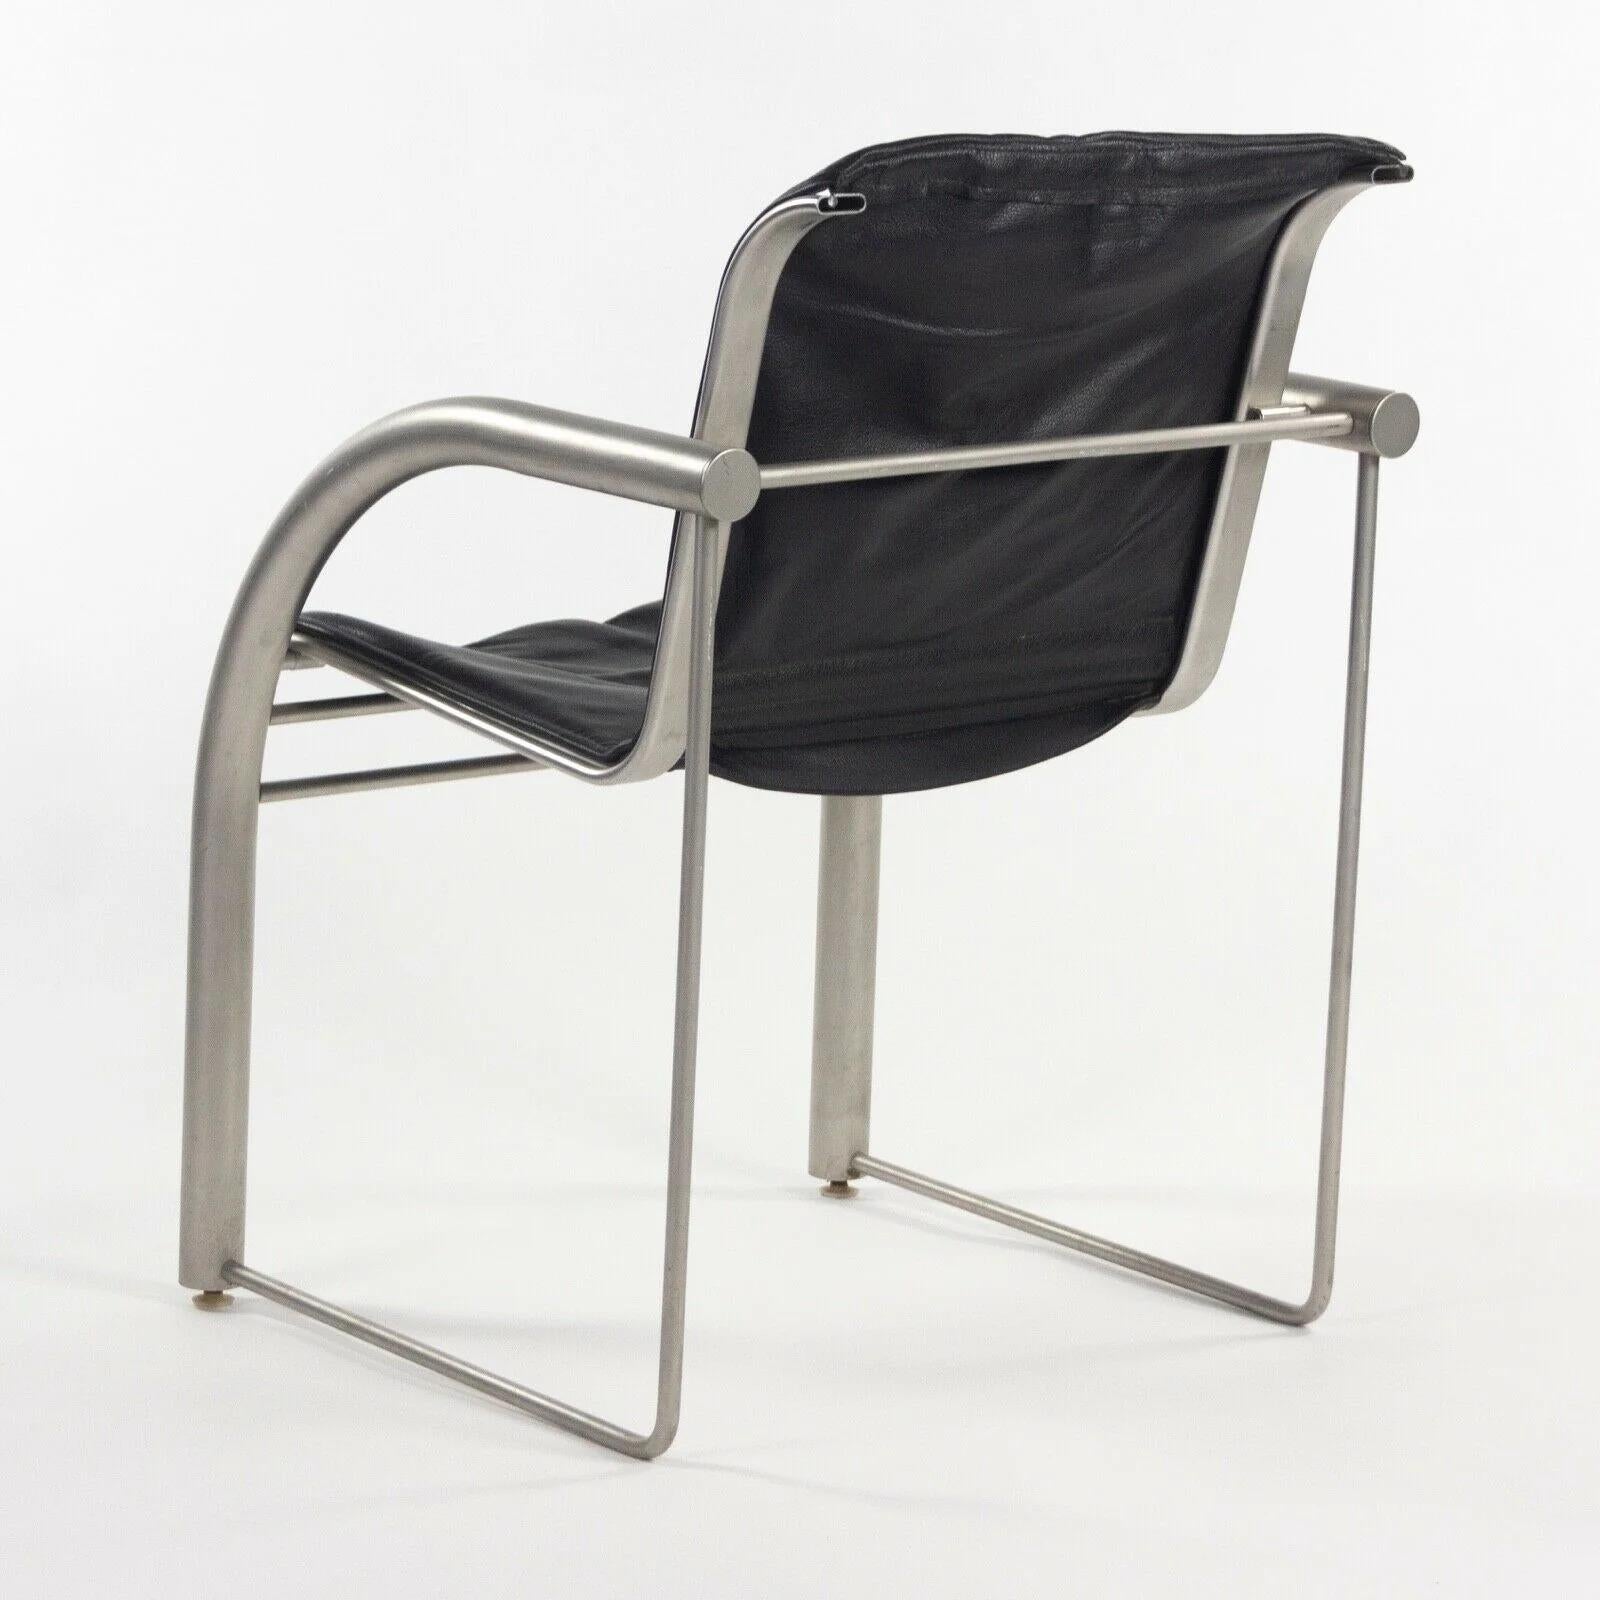 Prototype Richard Schultz 2002 Collection Stainless & Leather Dining Chair For Sale 1